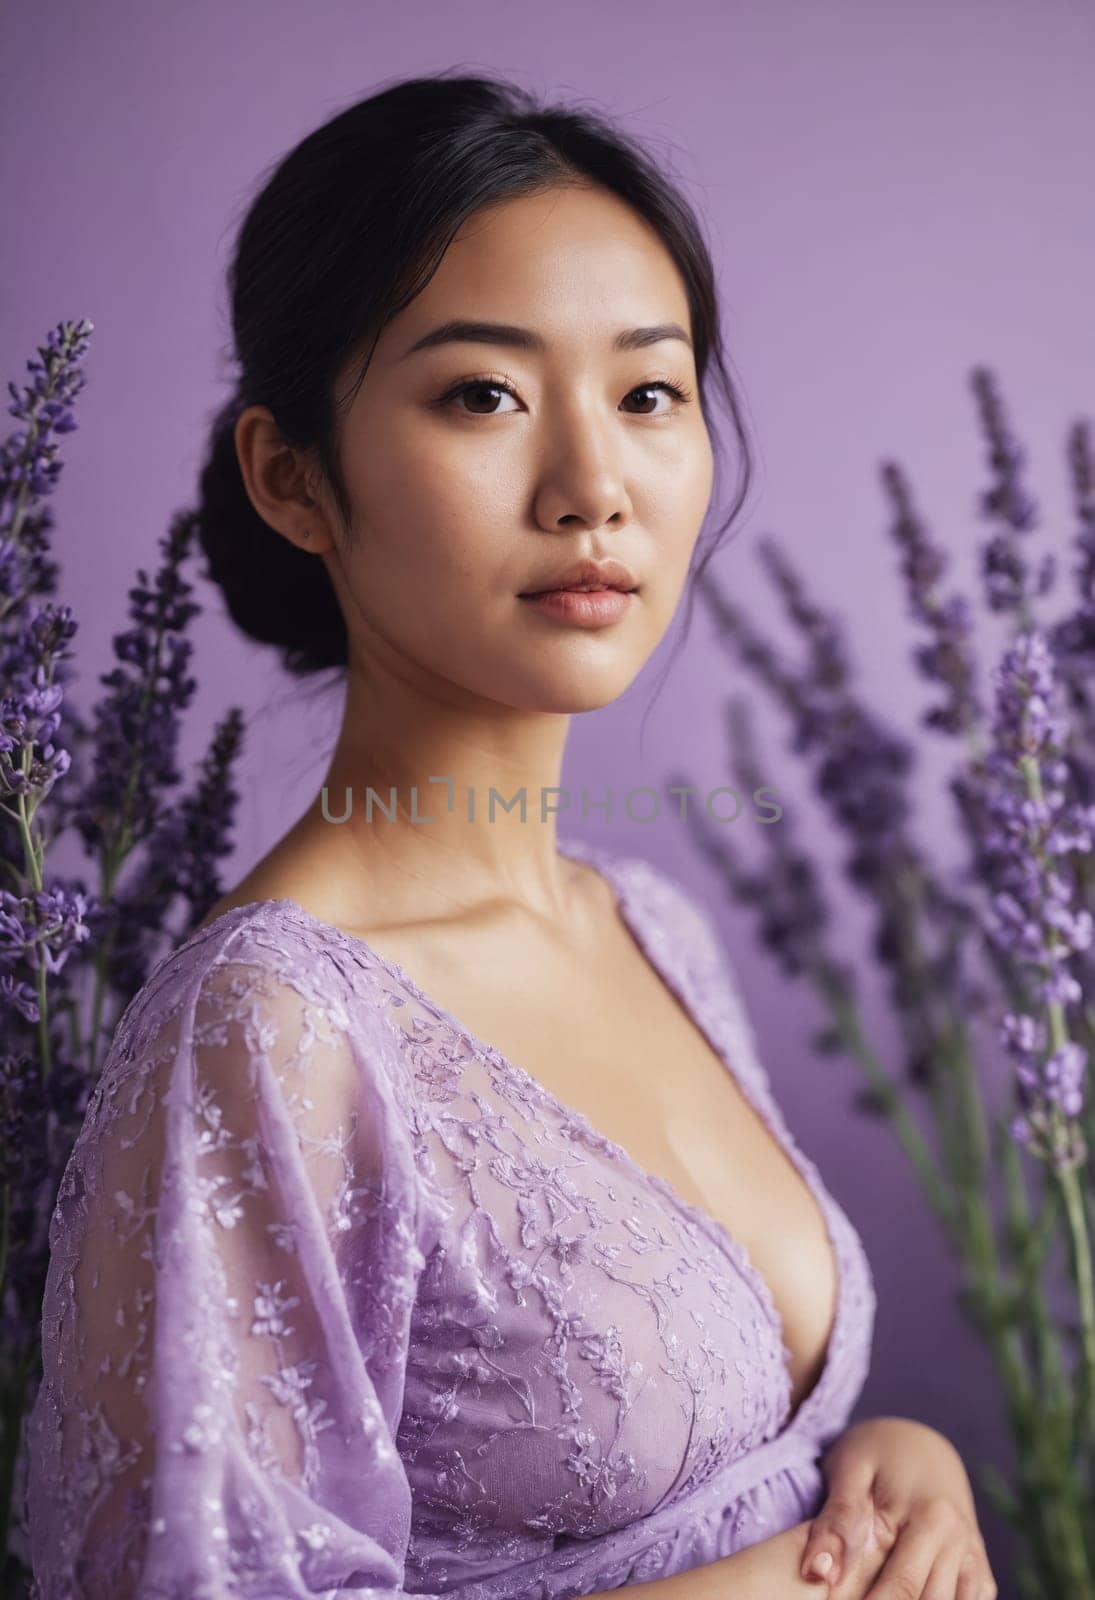 Individual in harmony with nature, standing among vibrant lavender blossoms in a floral patterned dress.